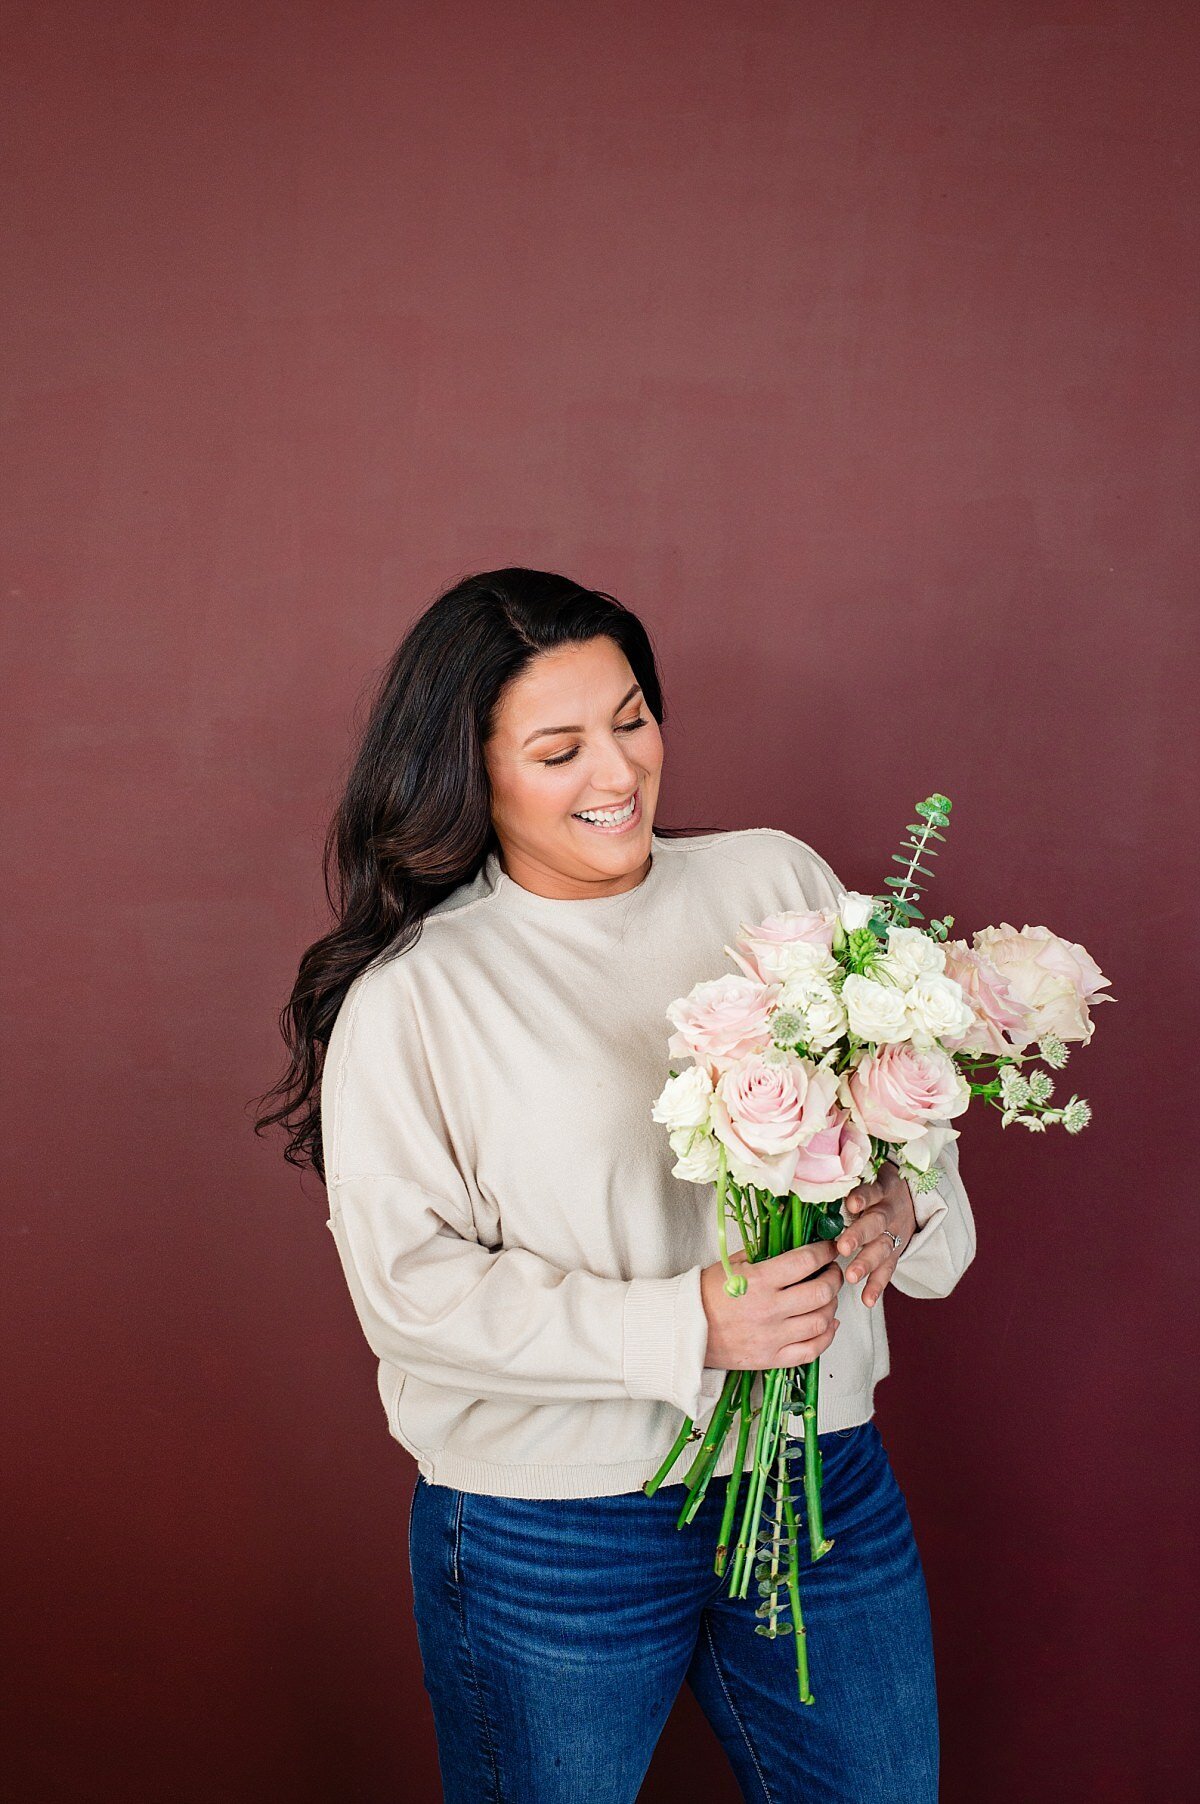 Florist standing in front of maroon wall and smiling at flowers she selects